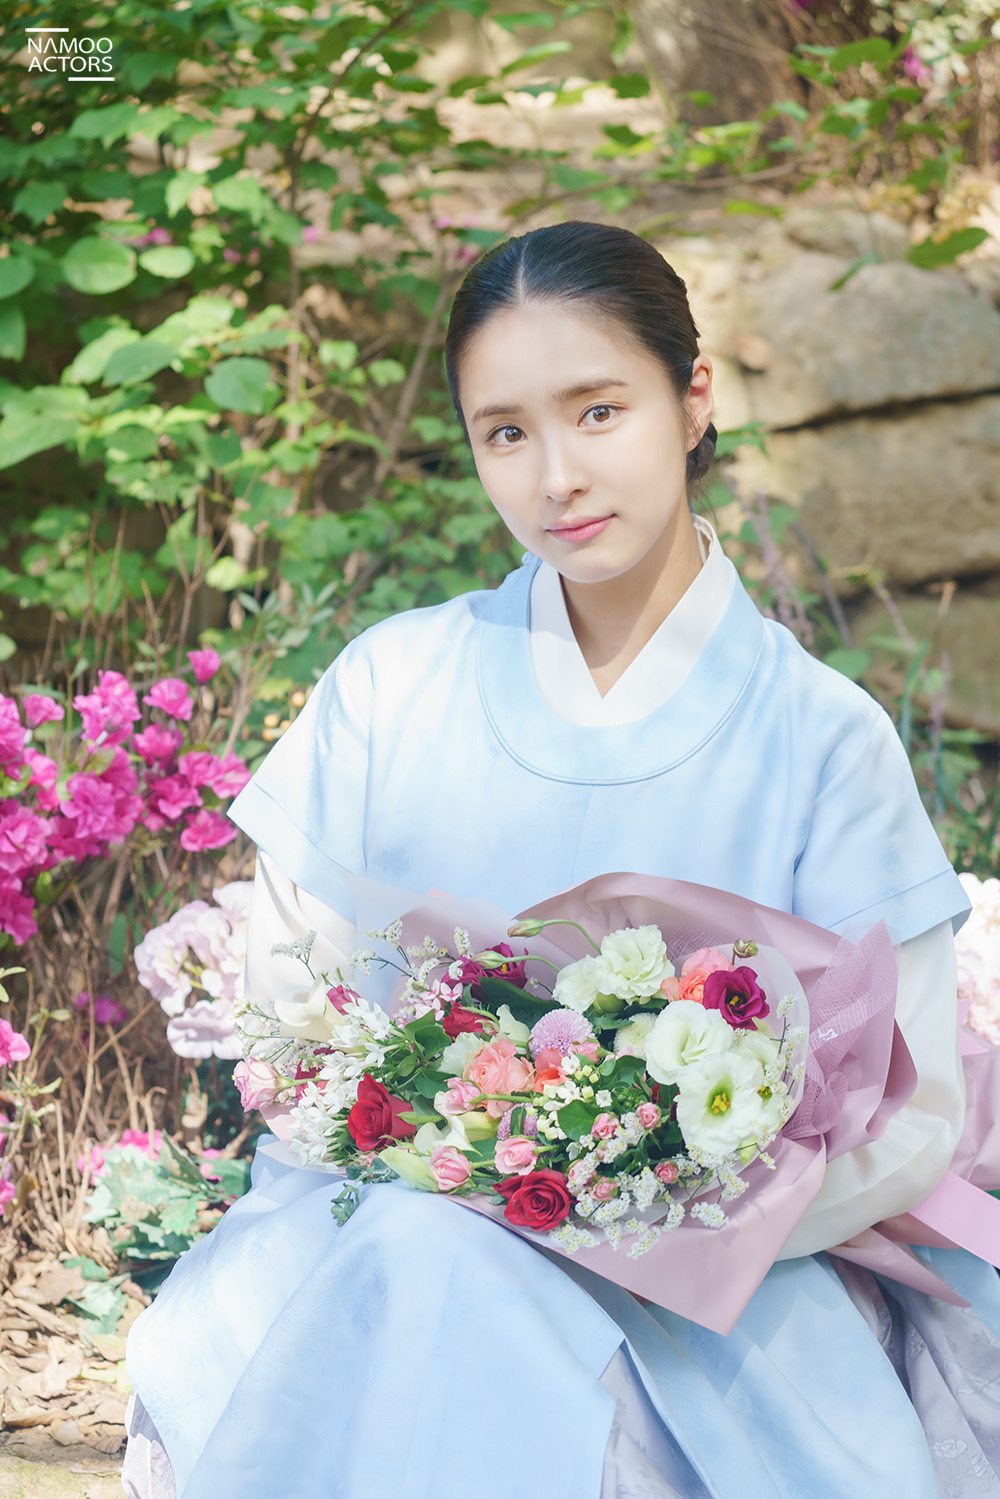 Seoul) = Actor Shin Se-kyung expressed his feelings about leaving the new employee, Na Hae-ryung.MBC drama Na Hae-ryung ended on the 26th.As we have been together for about three months from hot summer to cool autumn, the regrets of the audience are at their peak.Shin Se-kyung was transformed into the first Ada Lovelace () Na Hae-ryung of Korea, and was loved by a new character that he had never seen before.Na Hae-ryung, who can not be easily found in existing works, was indeed unique.In Joseon, where Confucianism and Confucianism are deeply rooted, Na Hae-ryung pioneers destiny as he dreams, rather than adapting to the life given to him.The courage to speak up the right values ​​even in the determination and injustice to go beyond the fence on the wedding day and to the Ada Lovelace star examination hall was the part that confirmed the enterprising aspect of the character.As such, the charm of Na Hae-ryung, which reversed the existing formula, was maximized by Shin Se-kyung.The tight inner work that was introduced in each work raised the immersion of the drama even more, and the delicate expressive power conveyed the feelings of the character to the room without distortion and laughed and rang the viewers.Shin Se-kyung, who has firmly established himself as an actor who believes in Na Hae-ryung, is also applauding his performance.Among them, Shin Se-kyungs testimony at the end of the drama is revealed and attracts attention. I do not feel that the shooting is over yet.For me, Na Hae-ryung was a very precious and meaningful work.I hope that Na Hae-ryung, a new employee, will remain a precious work even in the minds of viewers. Finally, I felt very much that the production crews who participated in the work really cared about our work. I was proud and proud to be able to join these works.I am so happy that I can meet my precious people. I will do my best to prepare and prepare for greeting with another work.Thank you for loving Na Hae-ryung, a new employee, so far. I thank the crew and viewers who have been together and thanked them for not forgetting.